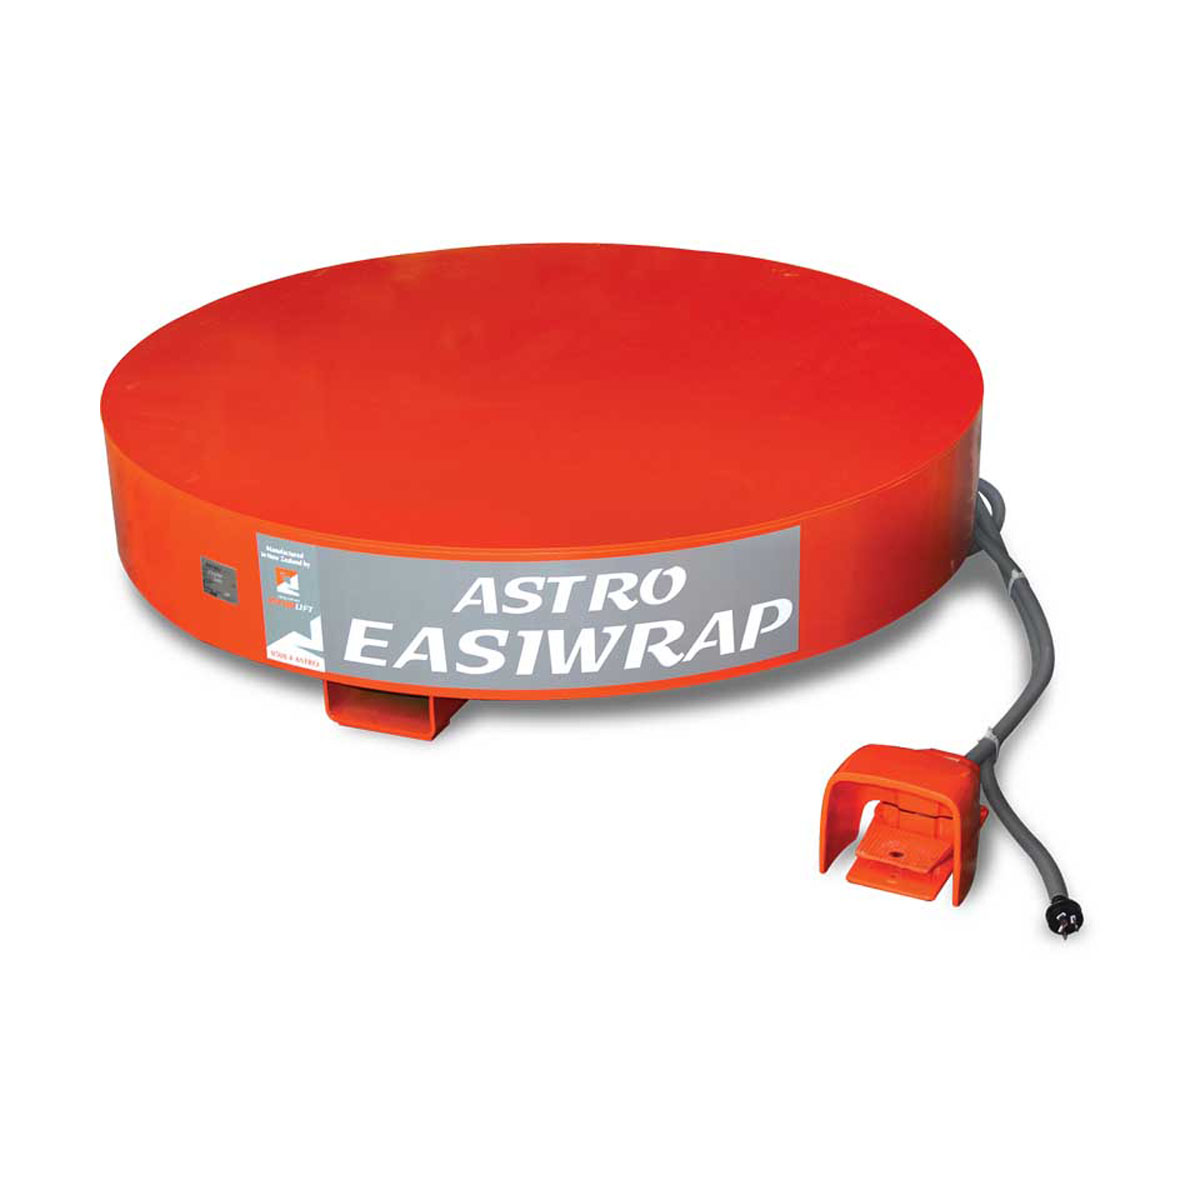 Buy Pallet Turntable (Easiwrap) available at Astrolift NZ